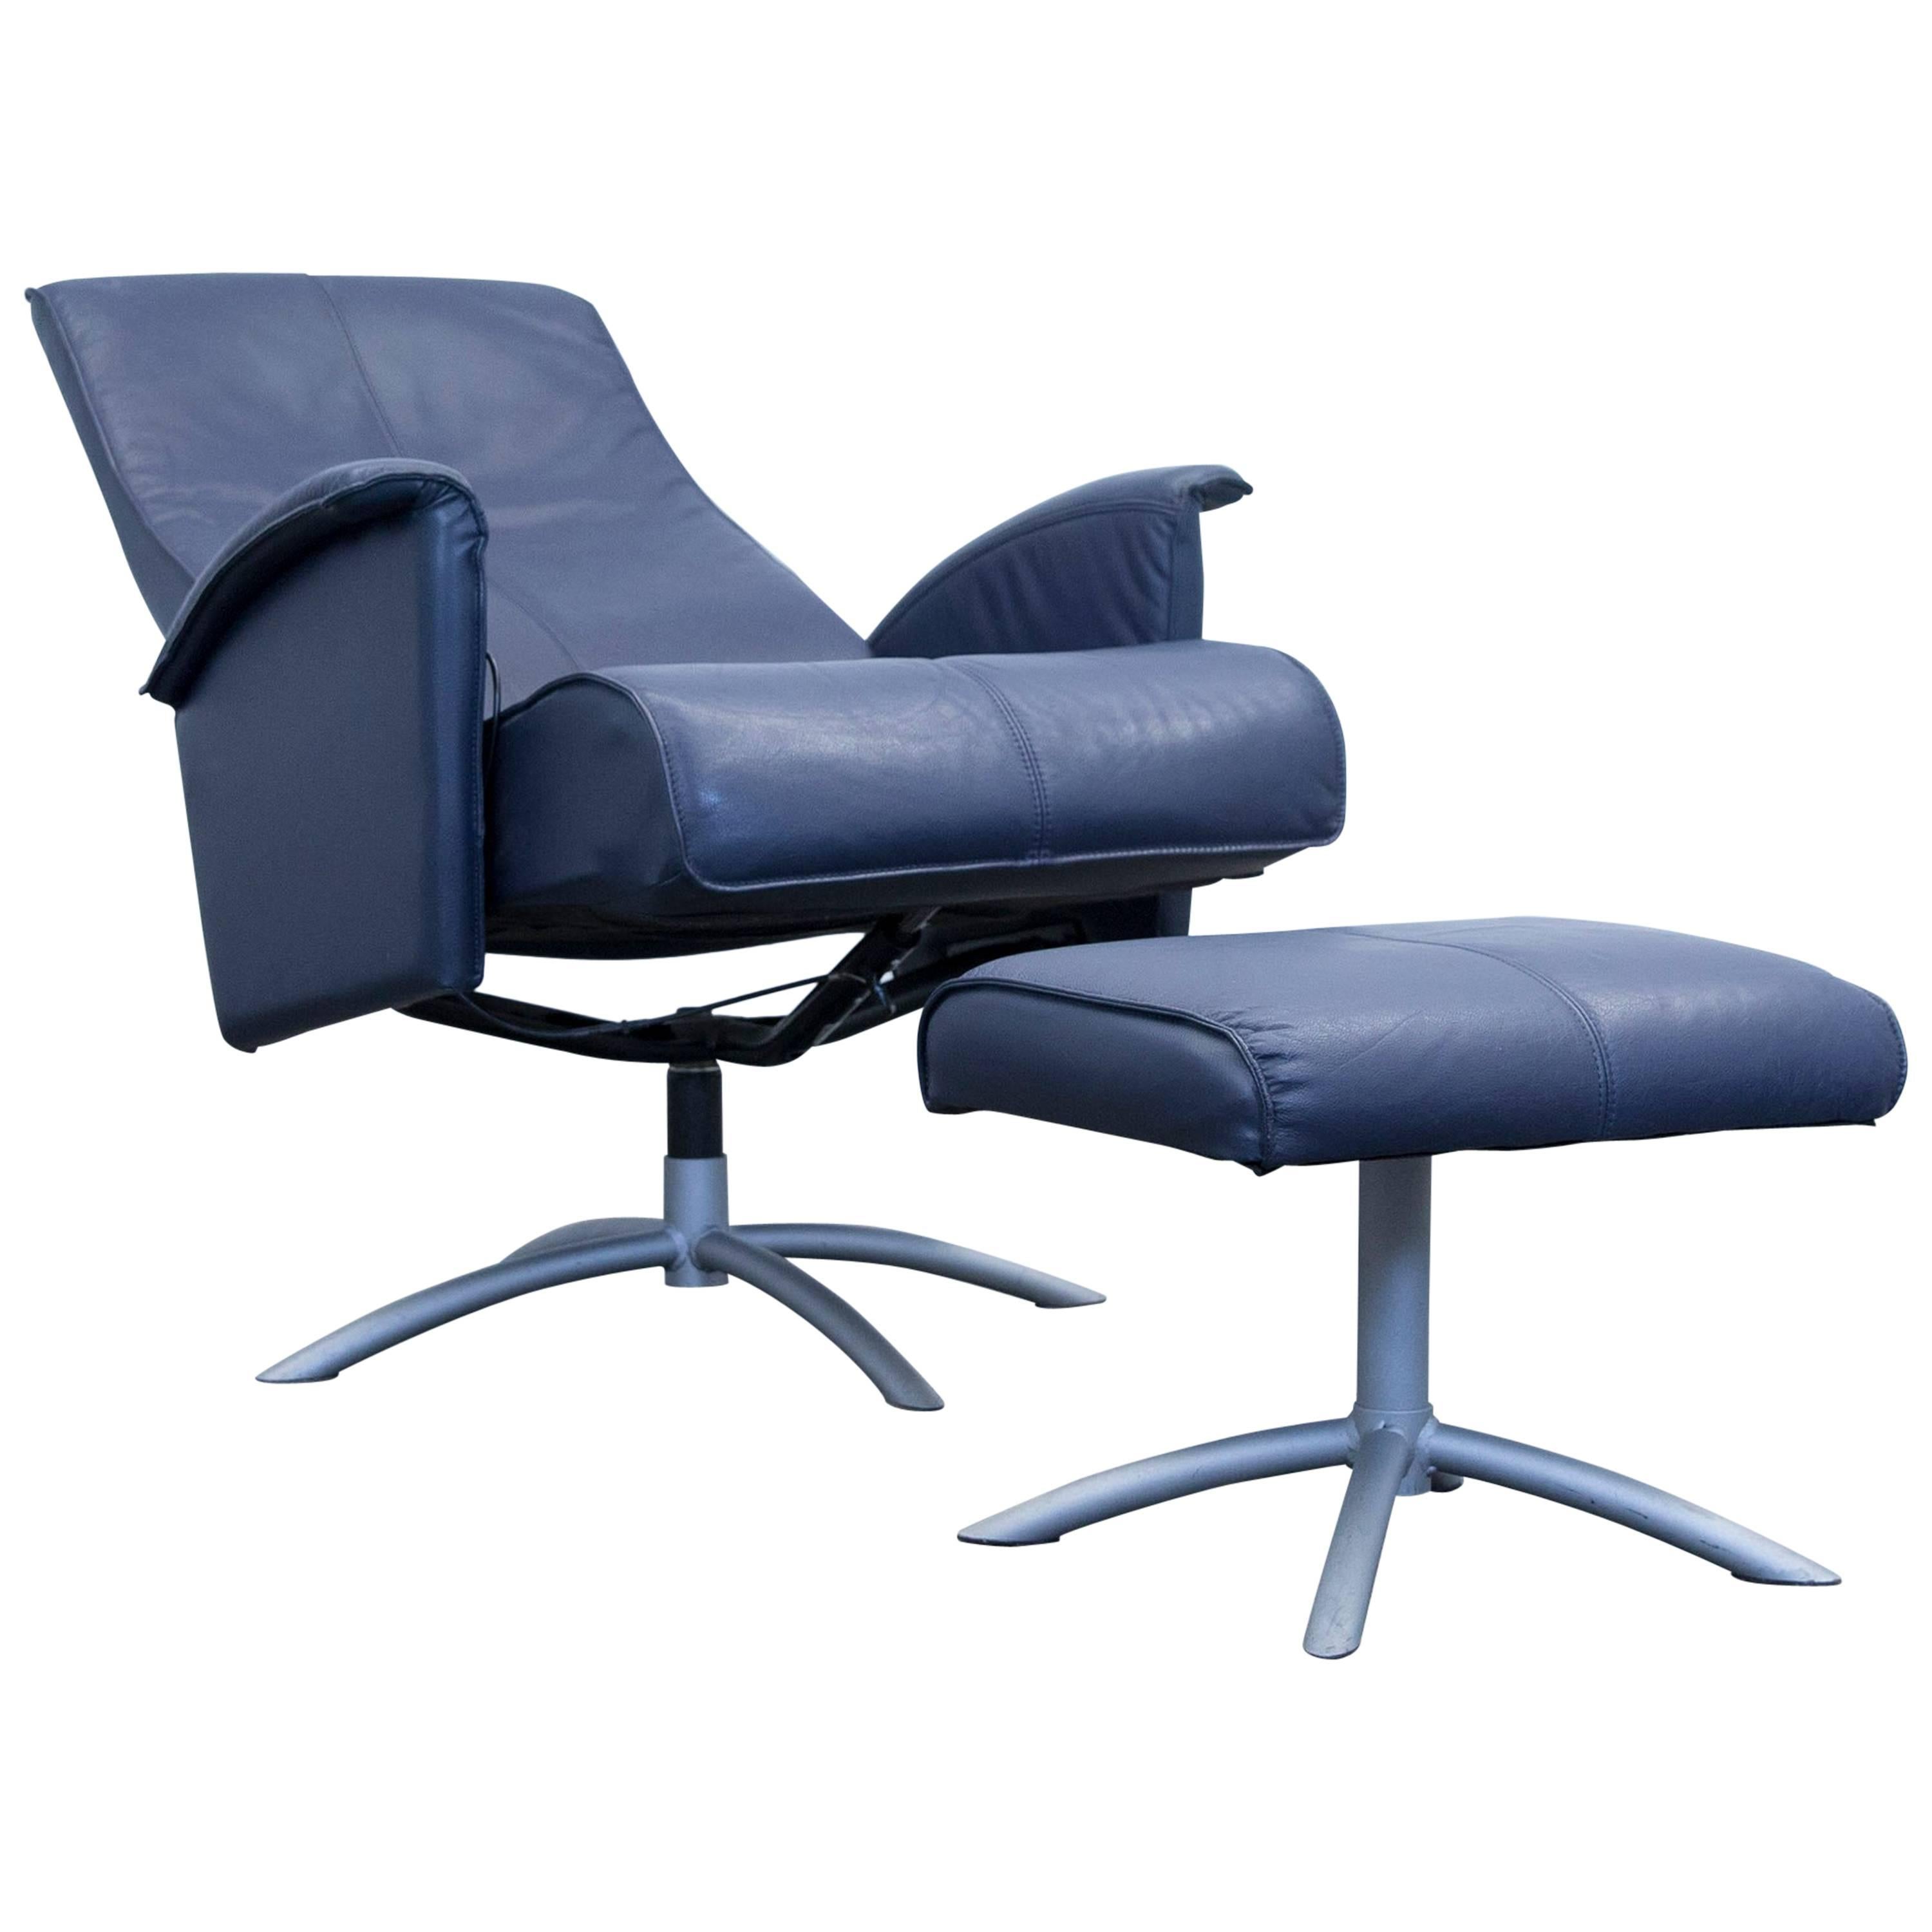 Designer Relax Armchair Set Leather Blue One Seat Couch Modern